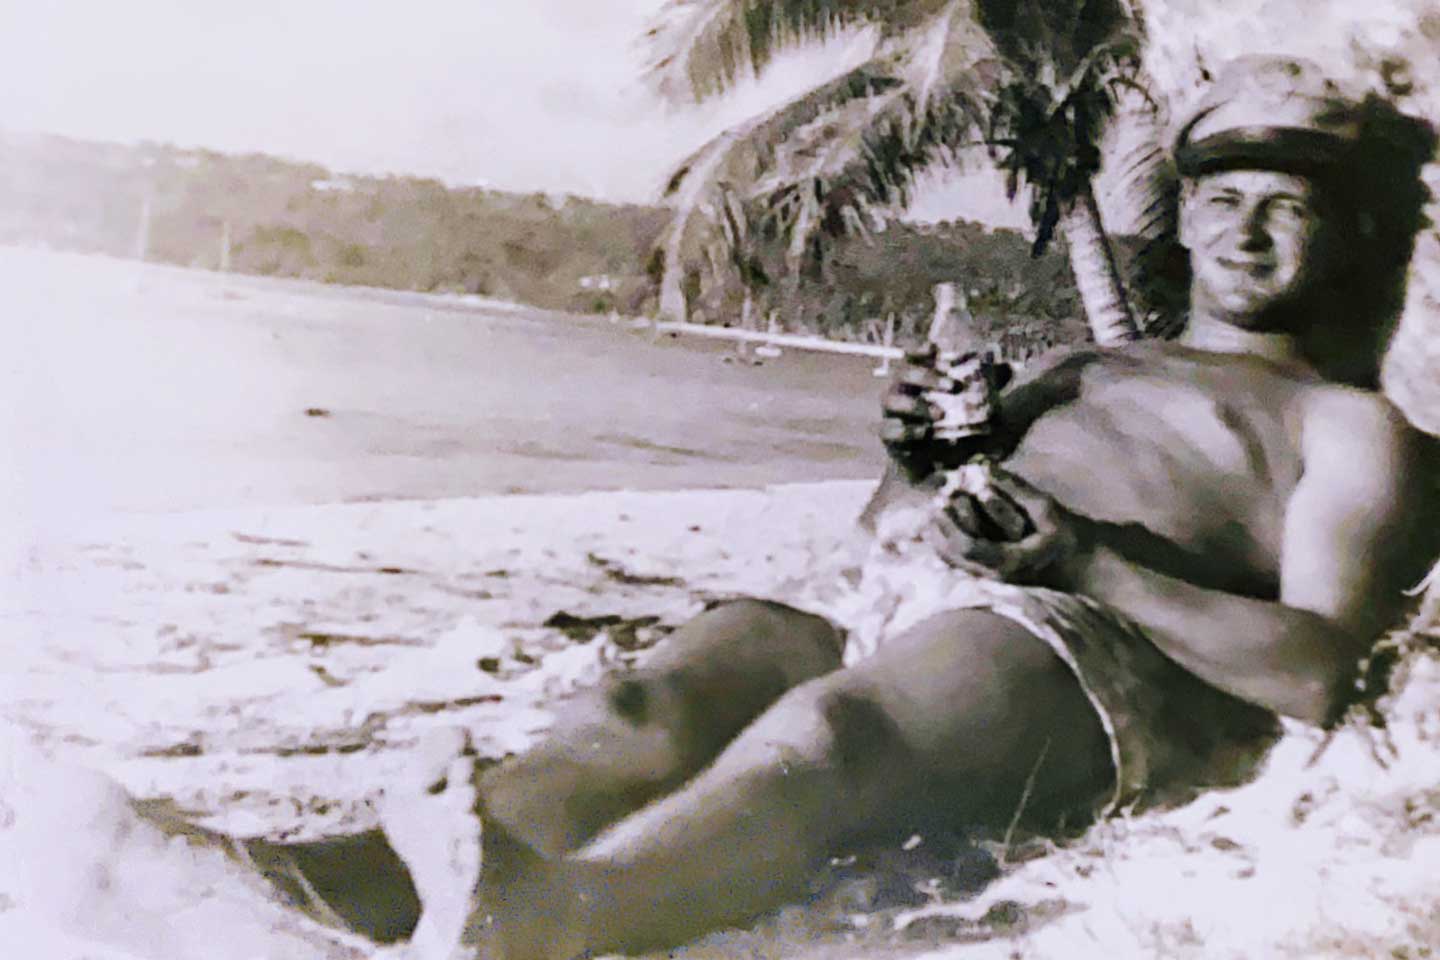 Young Paul laying shirtless on the beach